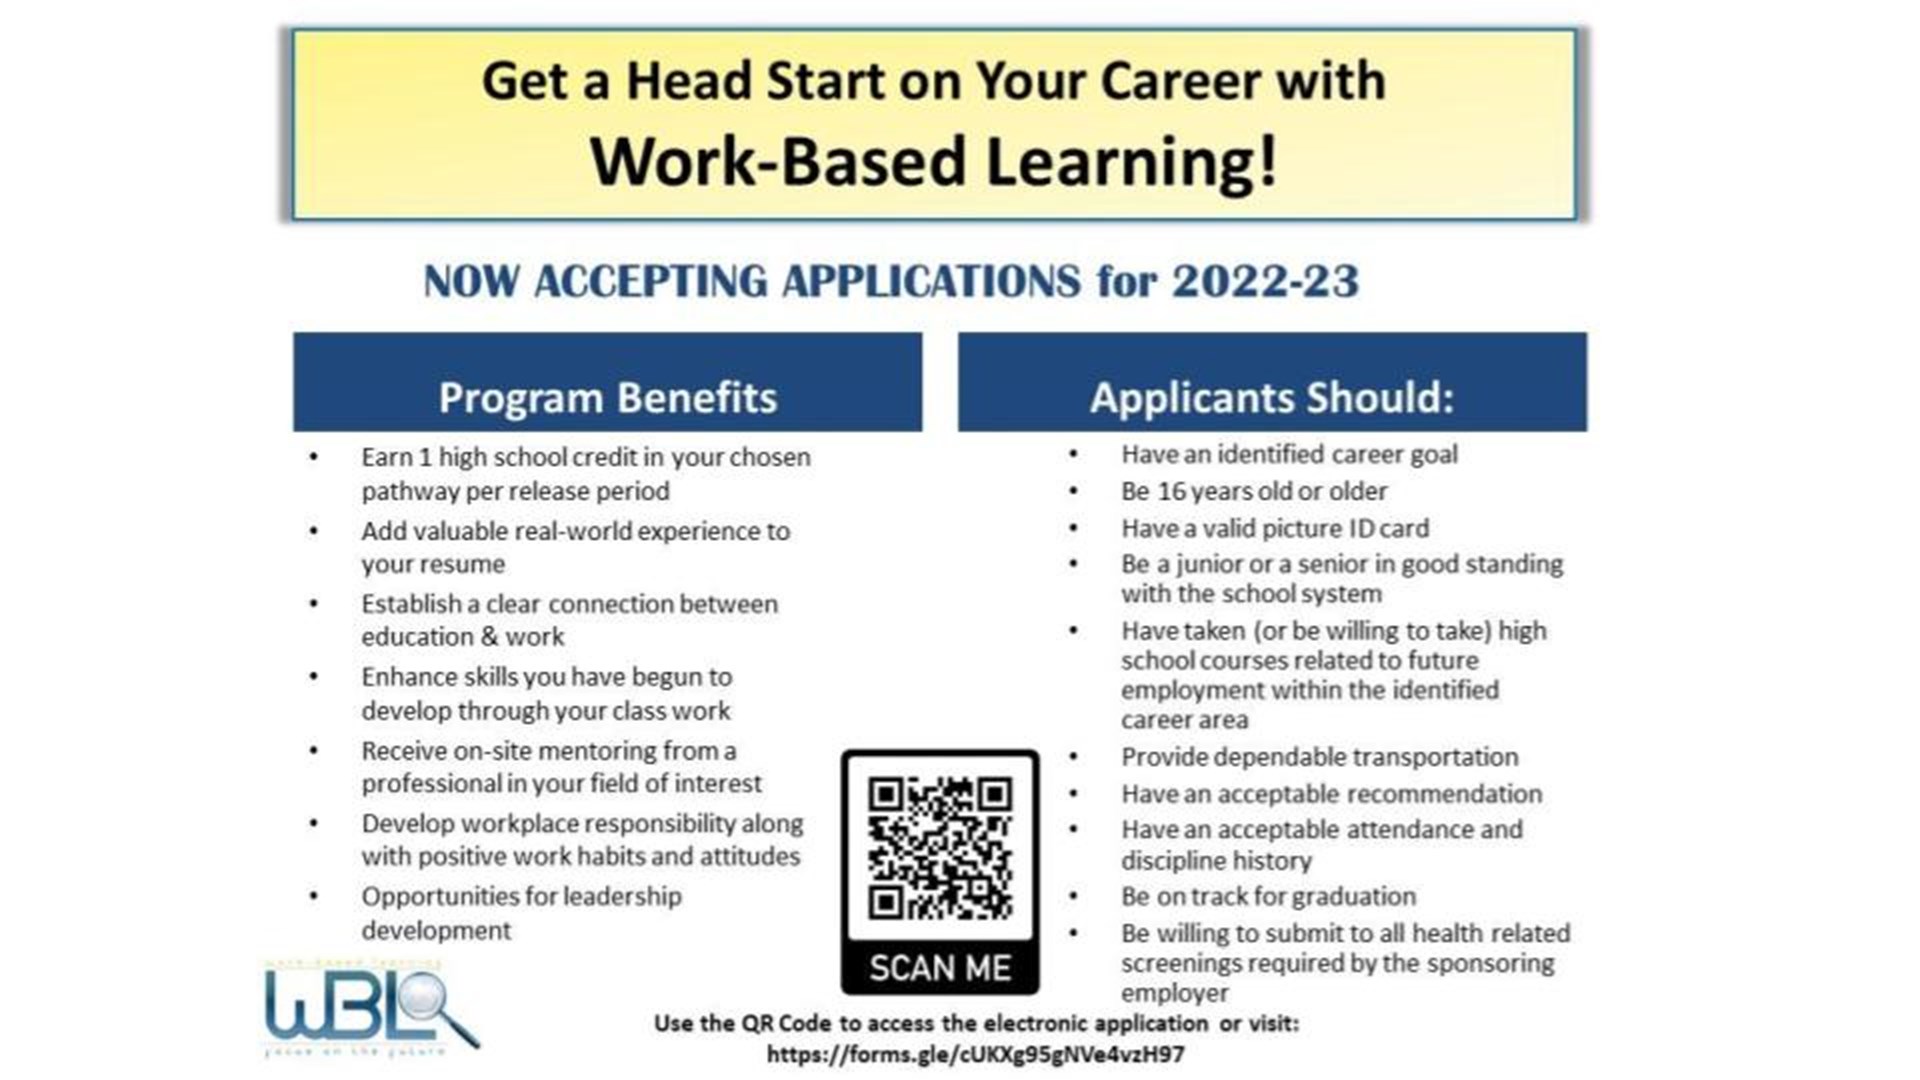 Are you interested in Work Based Learning?